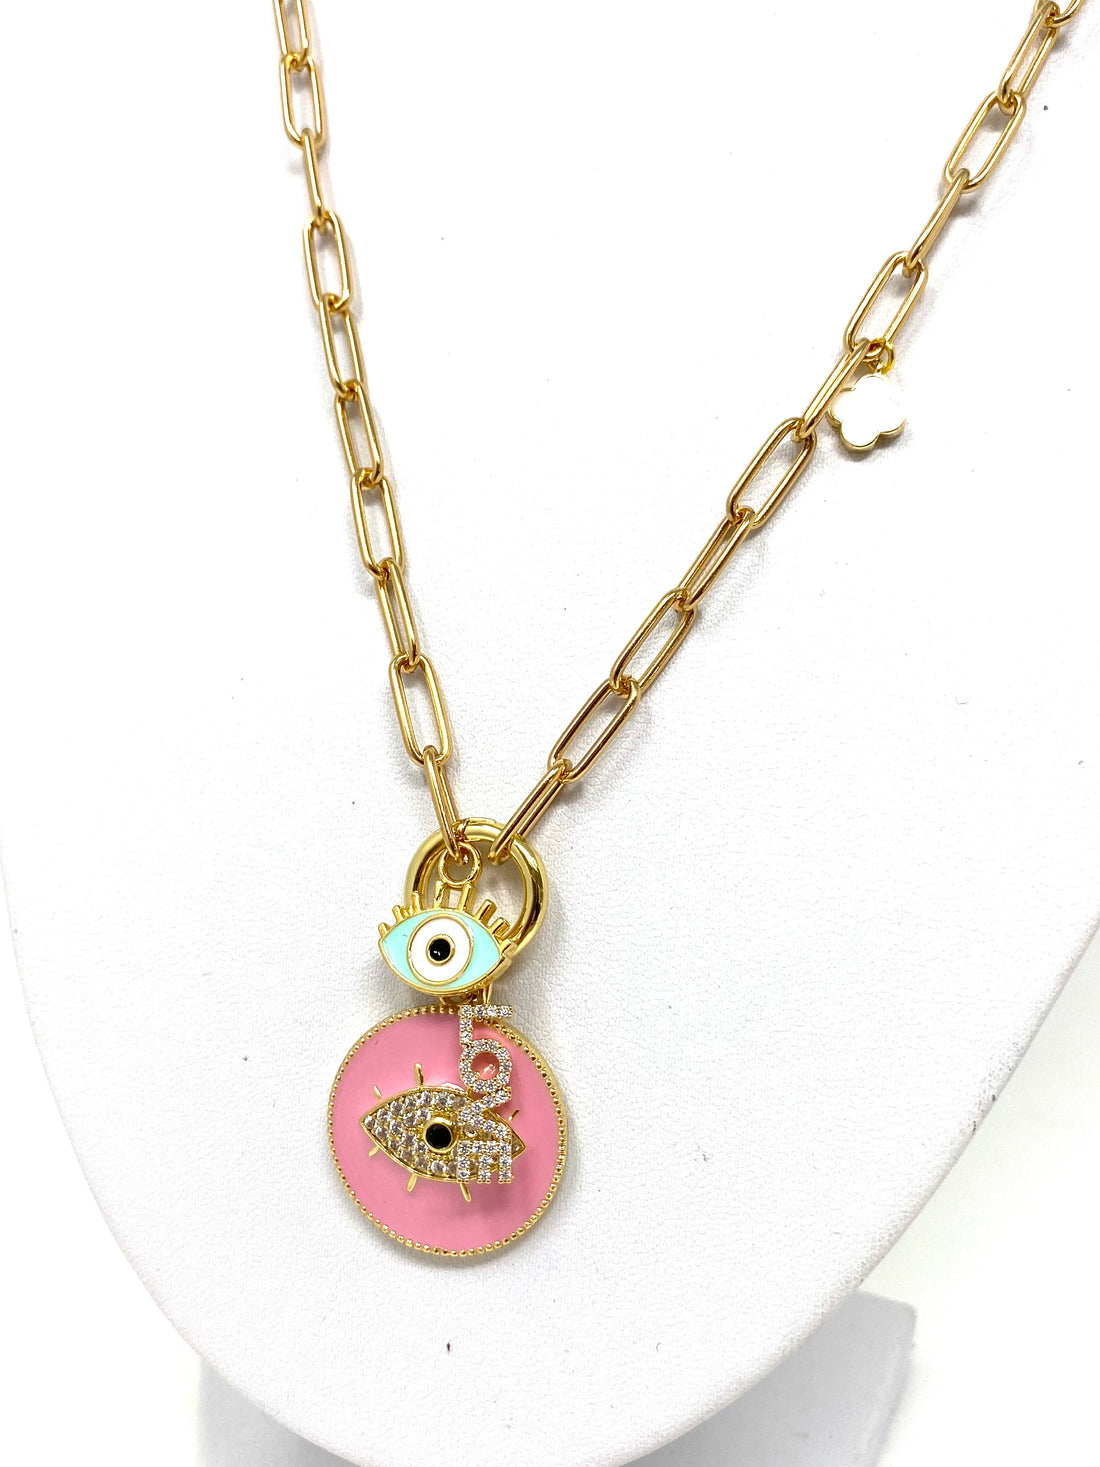 Soteria Charm Necklace in Pink